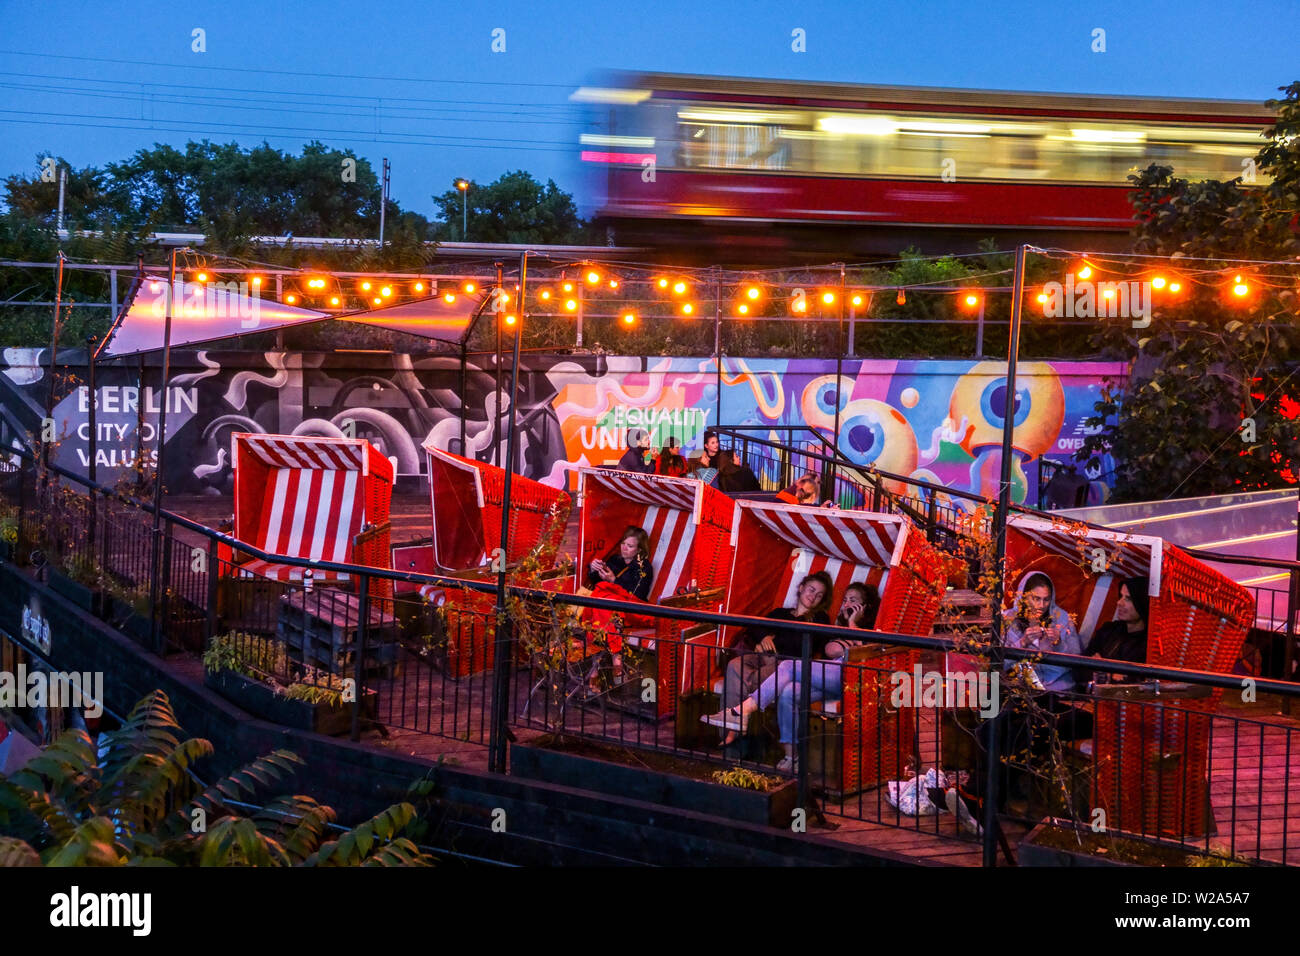 Young people in Else bar, a train, S-Bahn goes around, twilight, Alt Treptow, Berlin city life Germany, People sitting in wicker beach chairs Stock Photo